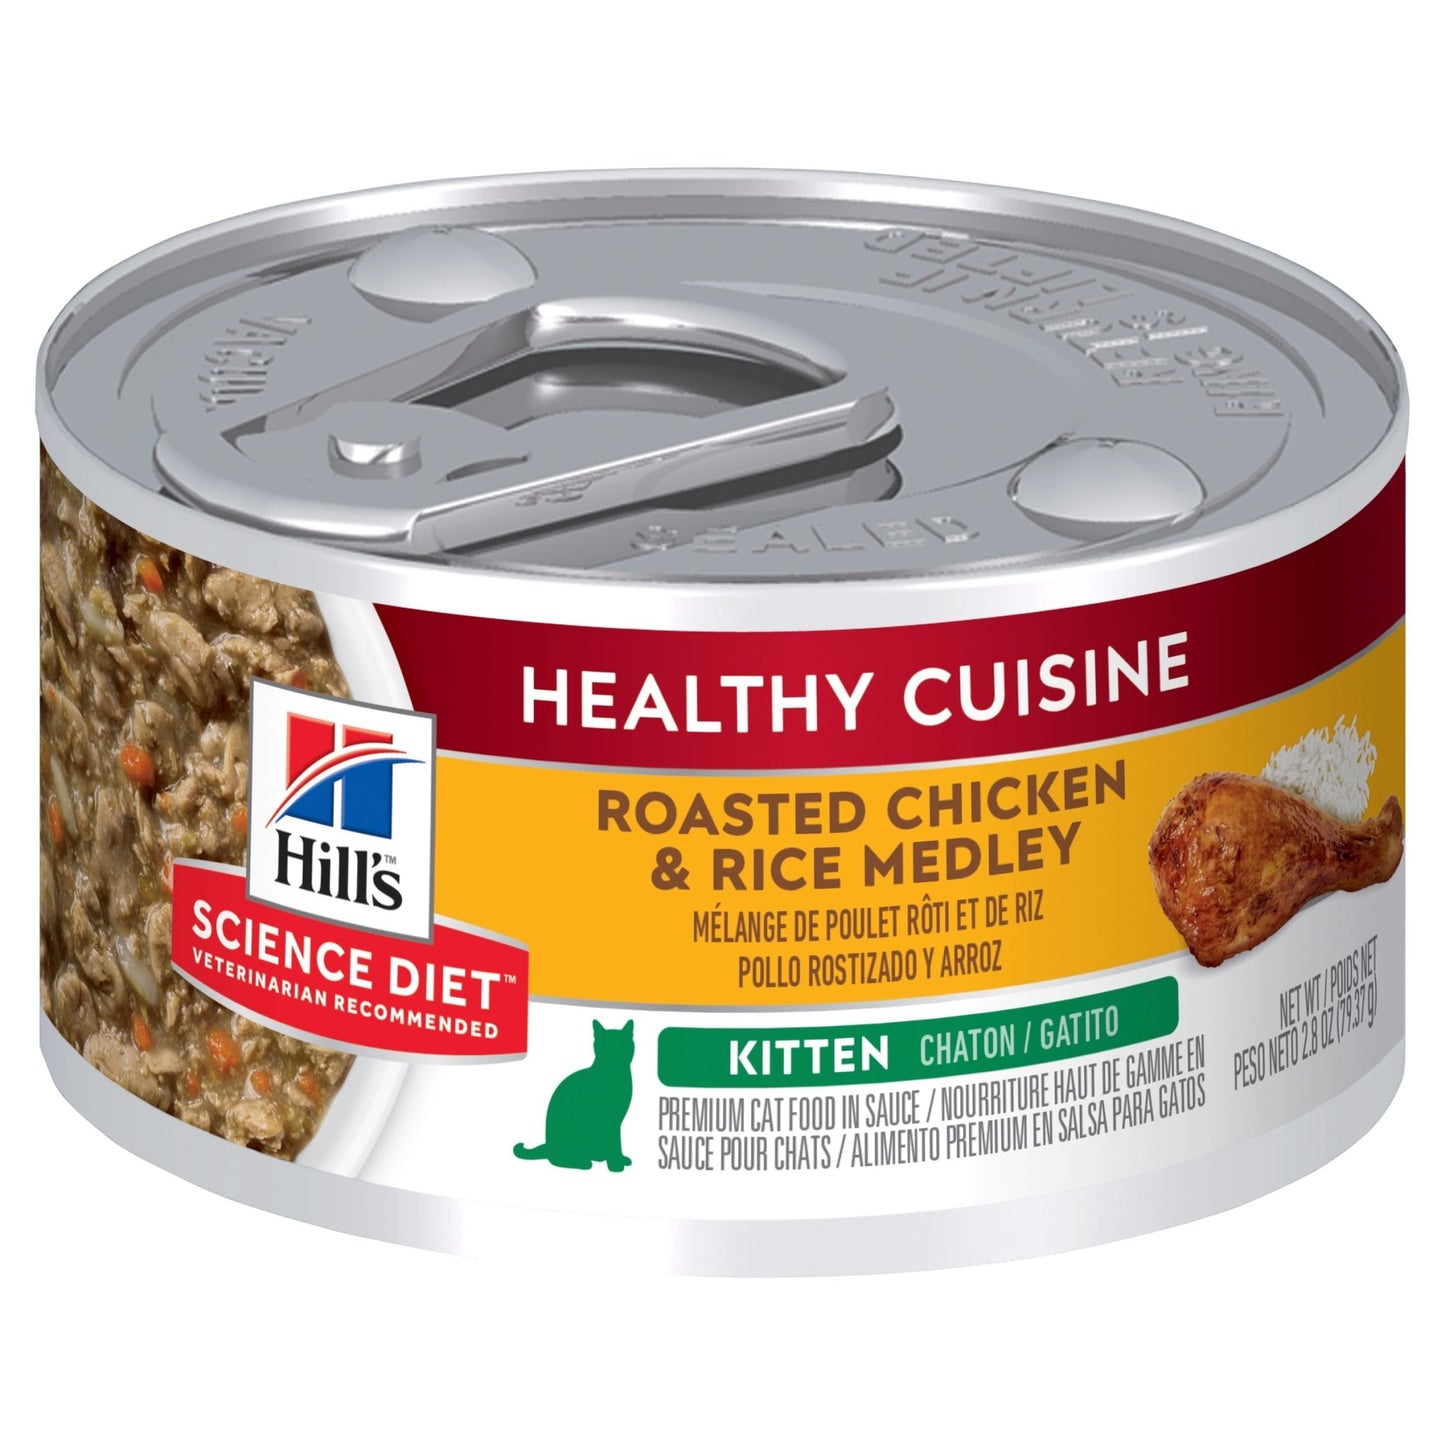 Hill's Science Diet Kitten Healthy Cuisine Chicken & Rice Medley Canned Cat Food 79g - Woonona Petfood & Produce